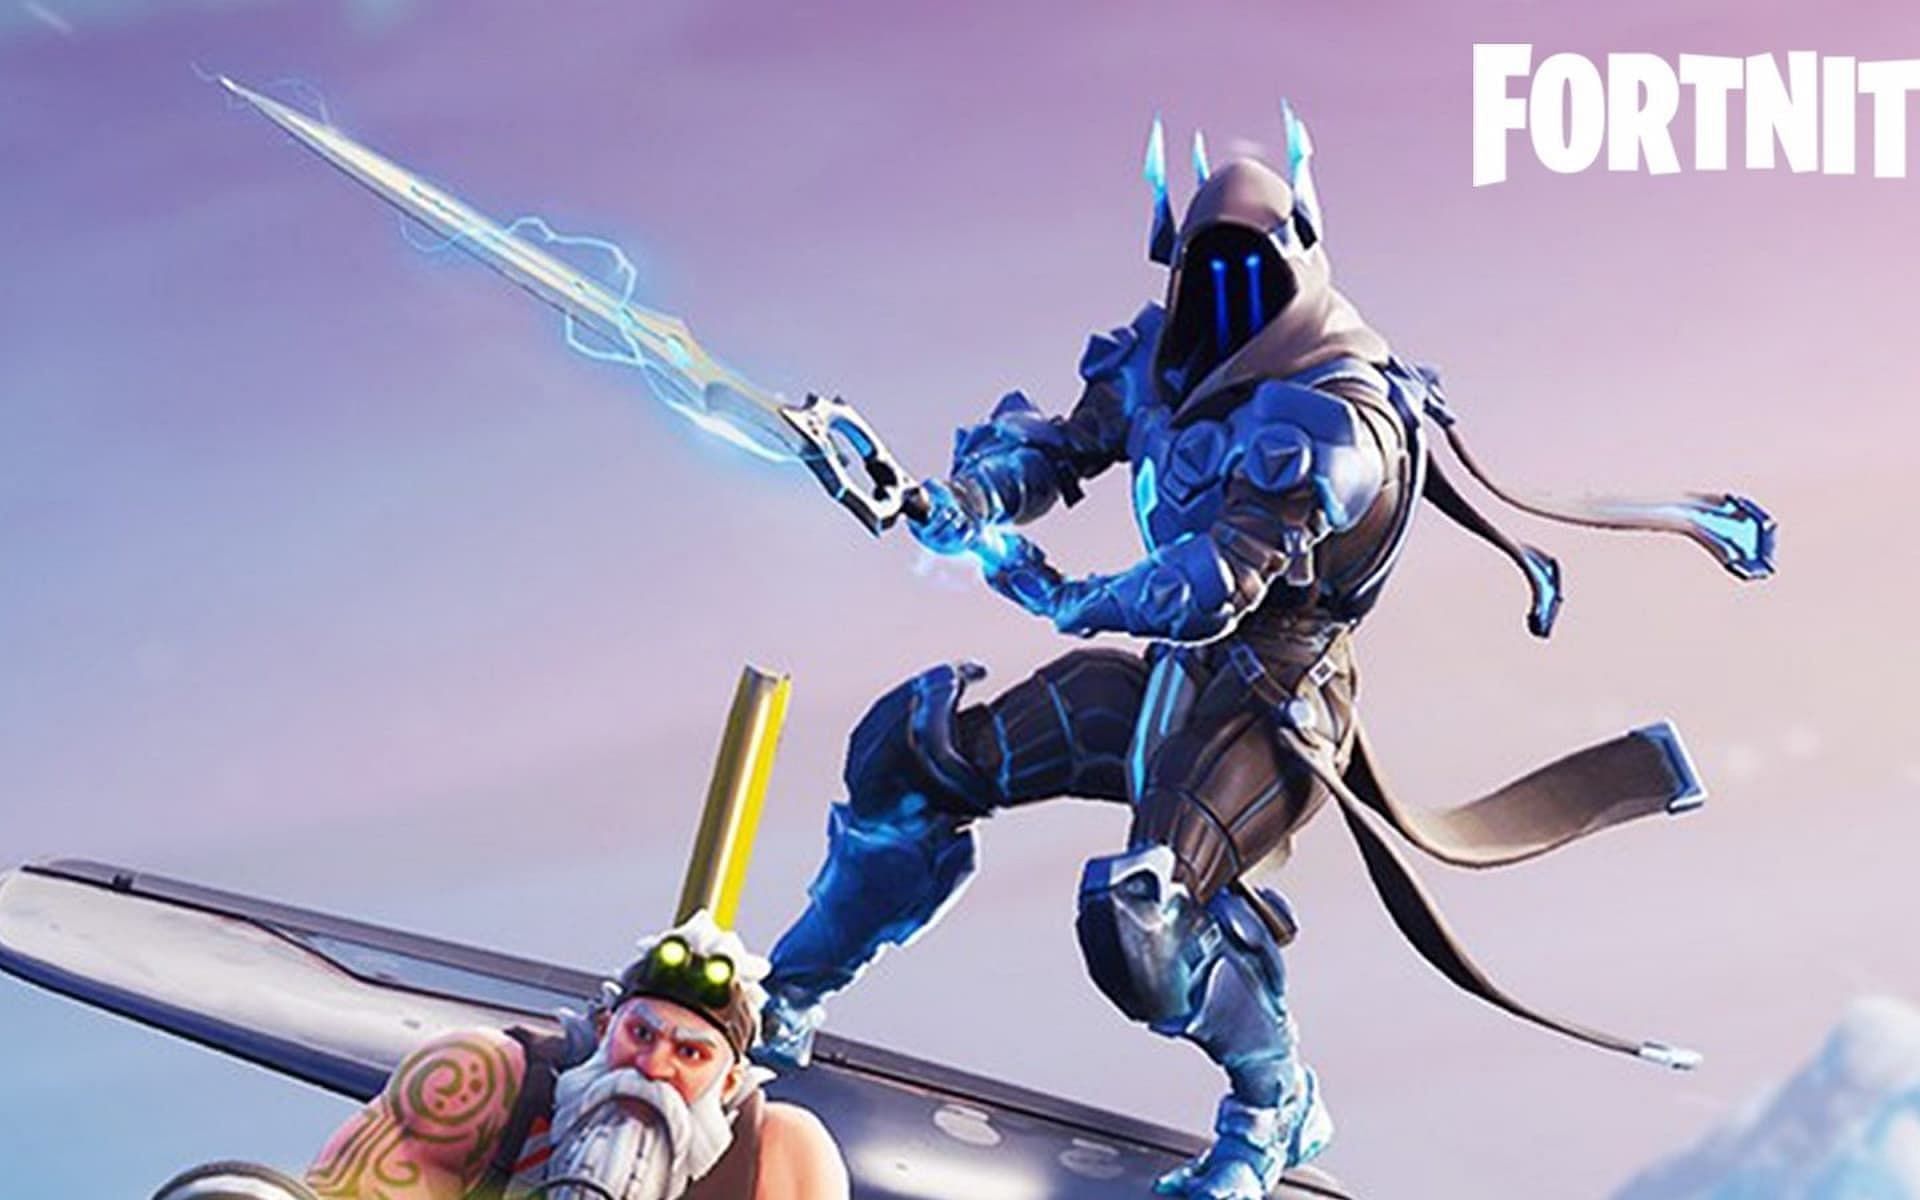 A promotional image showing off planes and the Infinity Blade (Image via Epic Games)